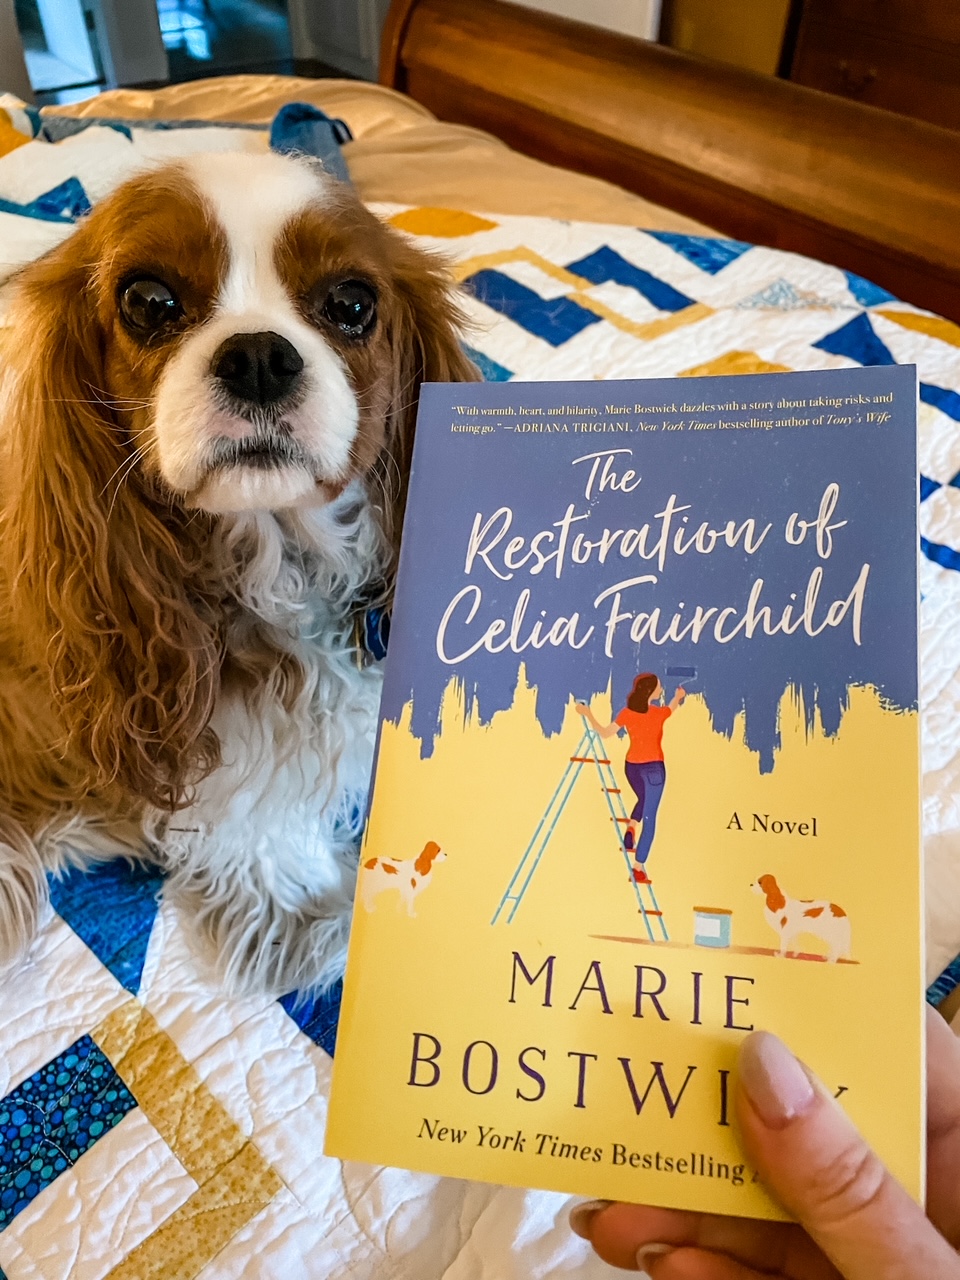 Marie holding a copy of the Restoration of Celia Fairchild above her dog.